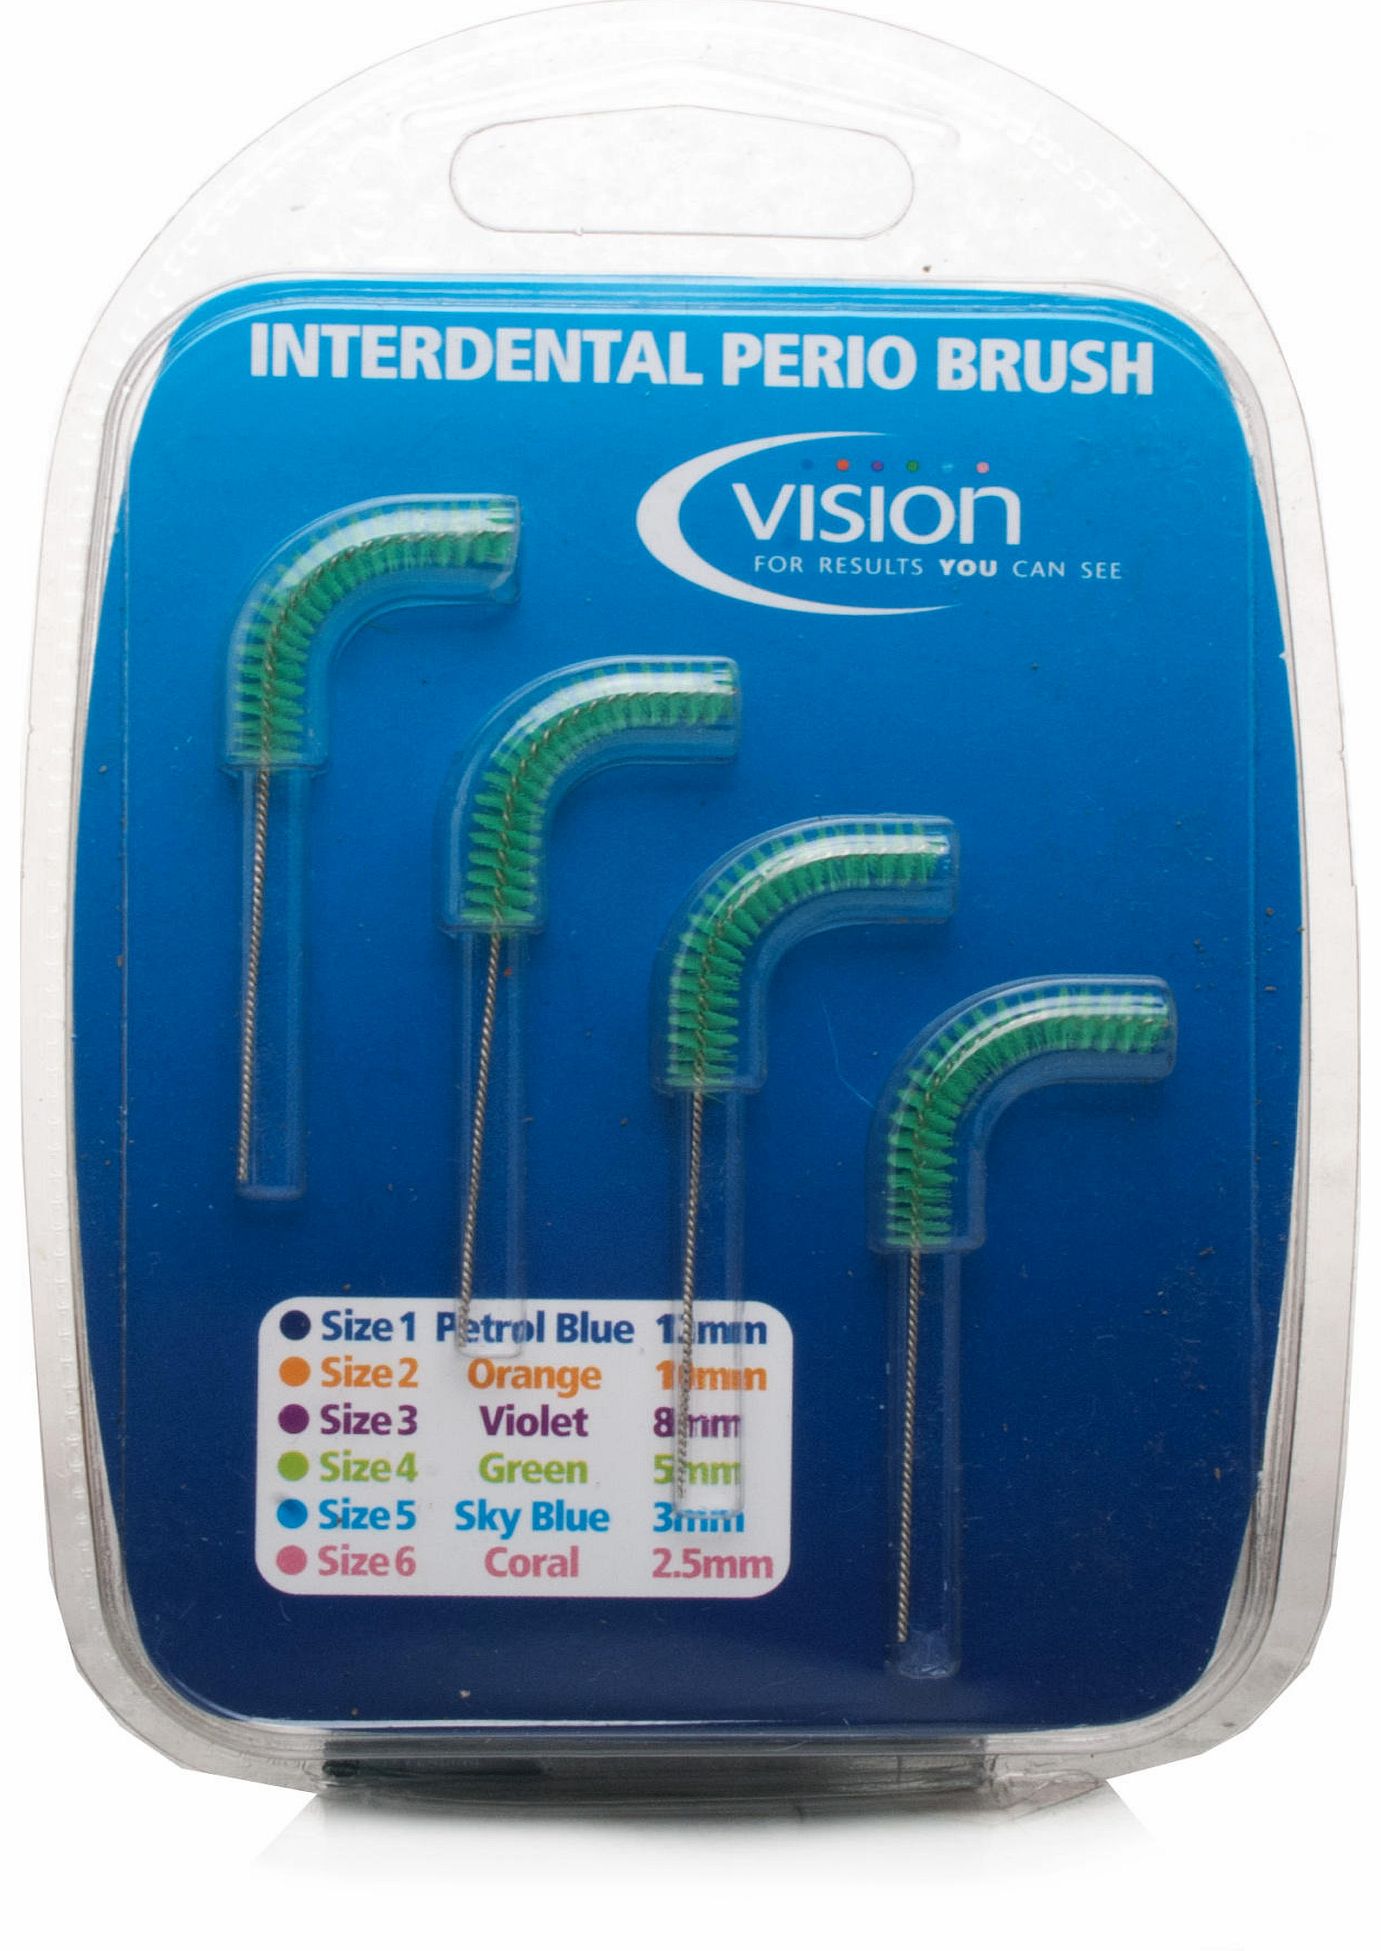 Interdental Perio Brushes 5mm Green